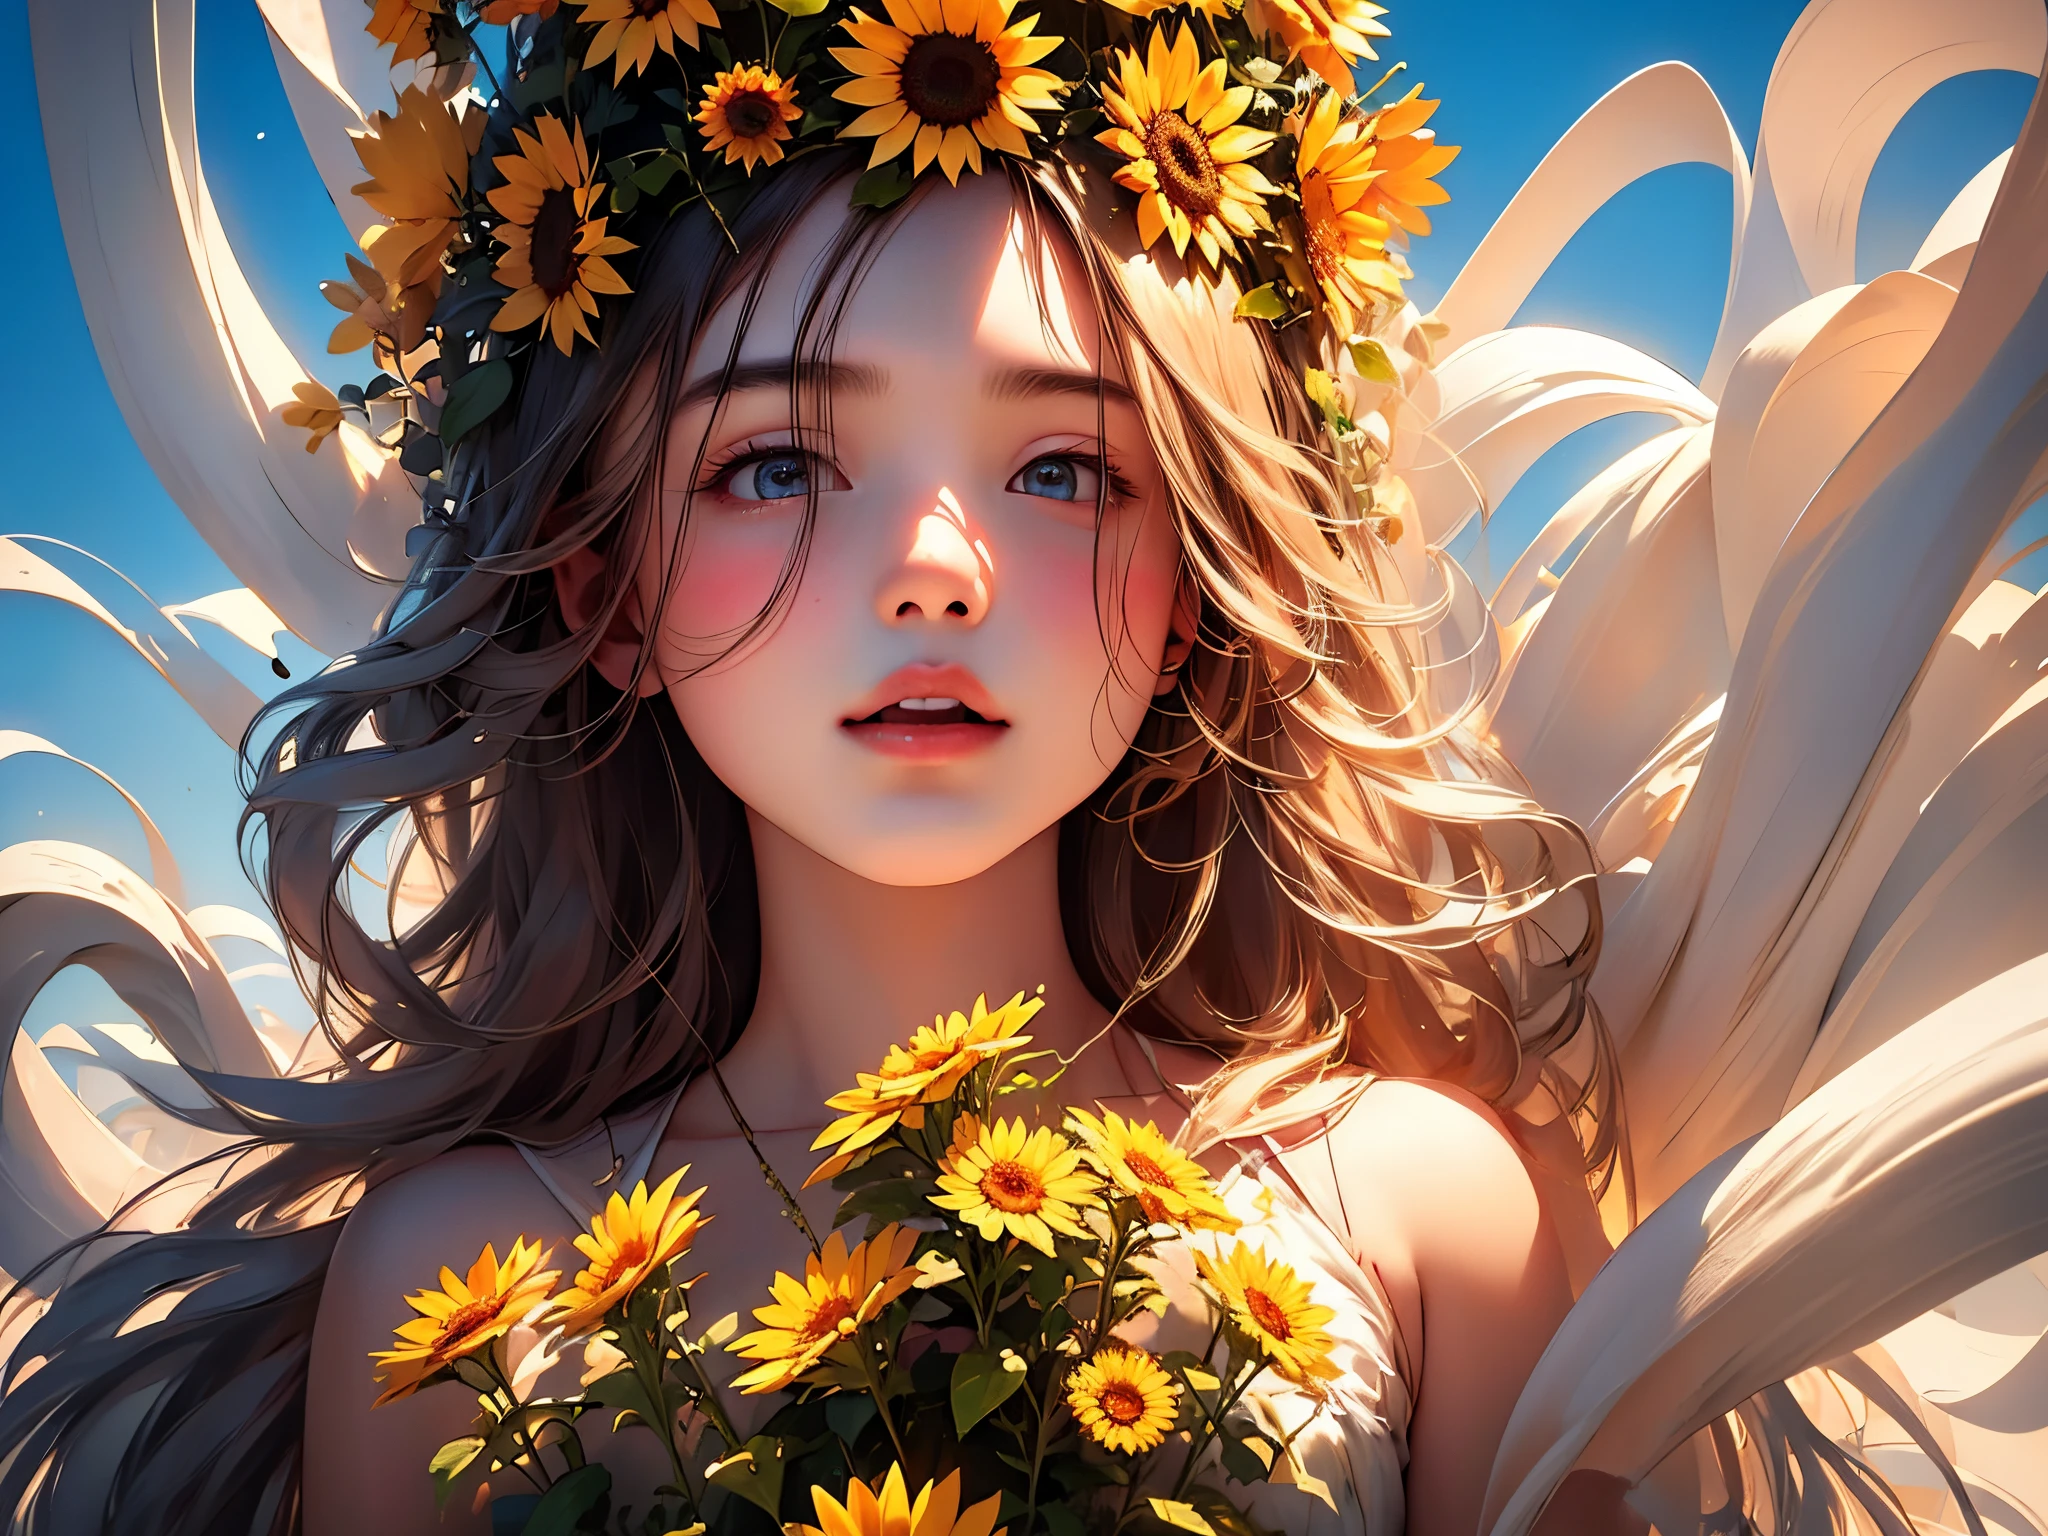 (best quality, highres, ultra-detailed, realistic:1.37), vibrant colors, warm hues, natural lighting, medium:fractal art, girl with flowing hair, serene expression, delicate facial features, intricate sunflower field, golden sunlight, soft breeze, dreamlike atmosphere, ethereal beauty, tranquil background, vivid petal textures, subtle shadows on the girl's face and body, fine details of the sunflowers, hypnotic patterns, captivating composition, magical and surreal, mesmerizing color palette, enchanting and peaceful ambiance.